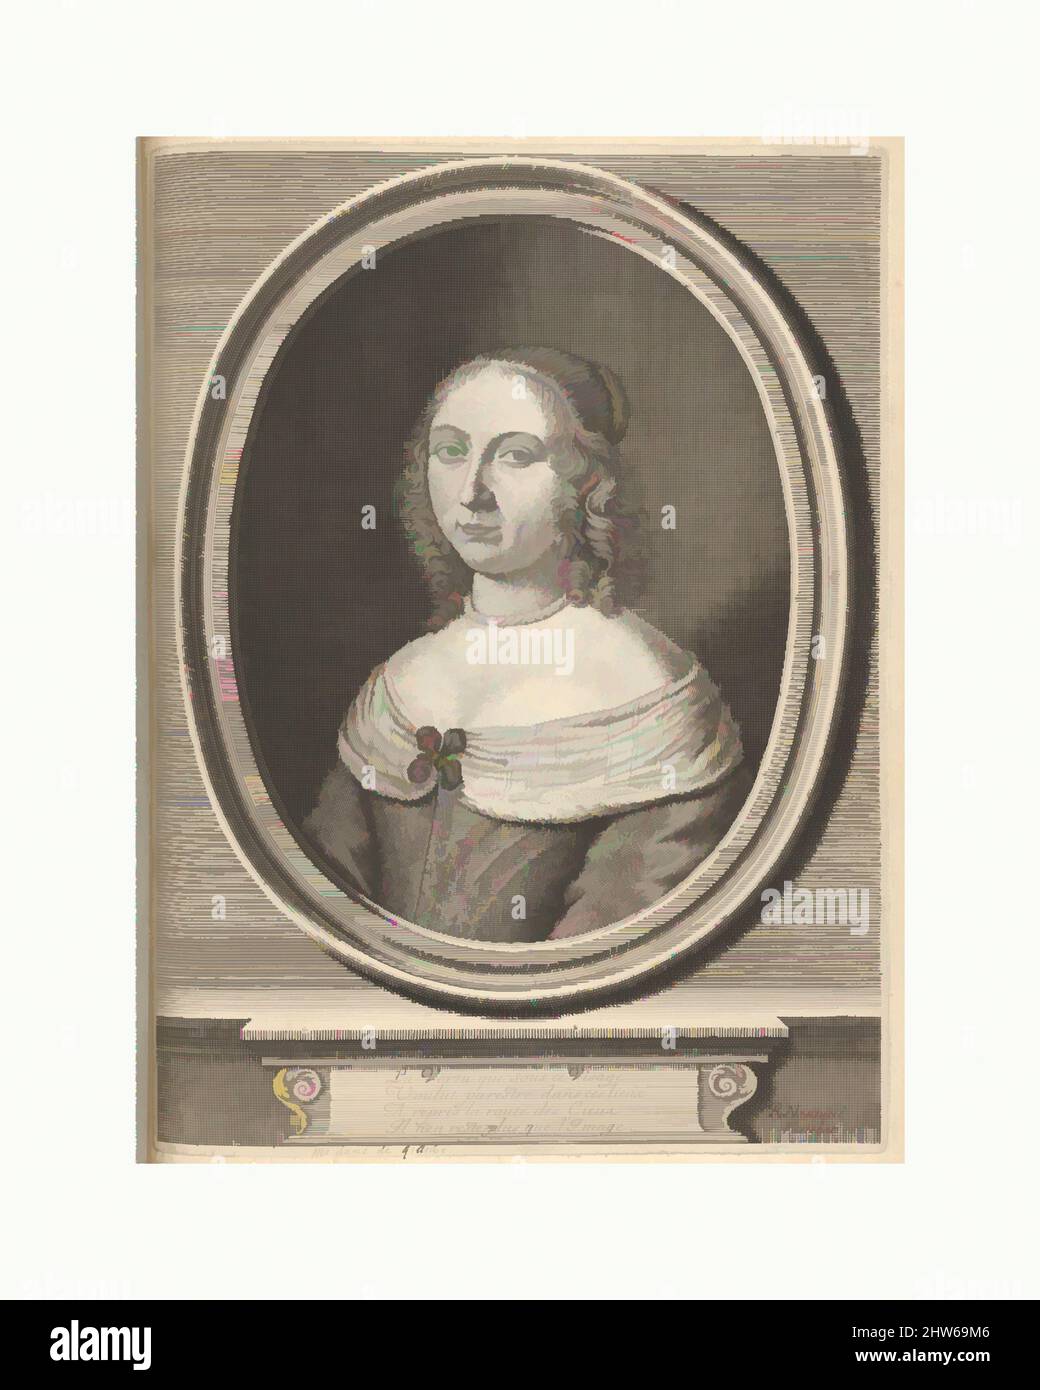 Art inspired by Portrait of Marie de Gillier, 17th century, Engraving, Sheet: 15 7/16 x 10 5/8 in. (39.2 x 27 cm), Robert Nanteuil (French, Reims 1623–1678 Paris), Part of a bound album containing 92 drawings and prints of anonymous and famous women of Europe, Classic works modernized by Artotop with a splash of modernity. Shapes, color and value, eye-catching visual impact on art. Emotions through freedom of artworks in a contemporary way. A timeless message pursuing a wildly creative new direction. Artists turning to the digital medium and creating the Artotop NFT Stock Photo